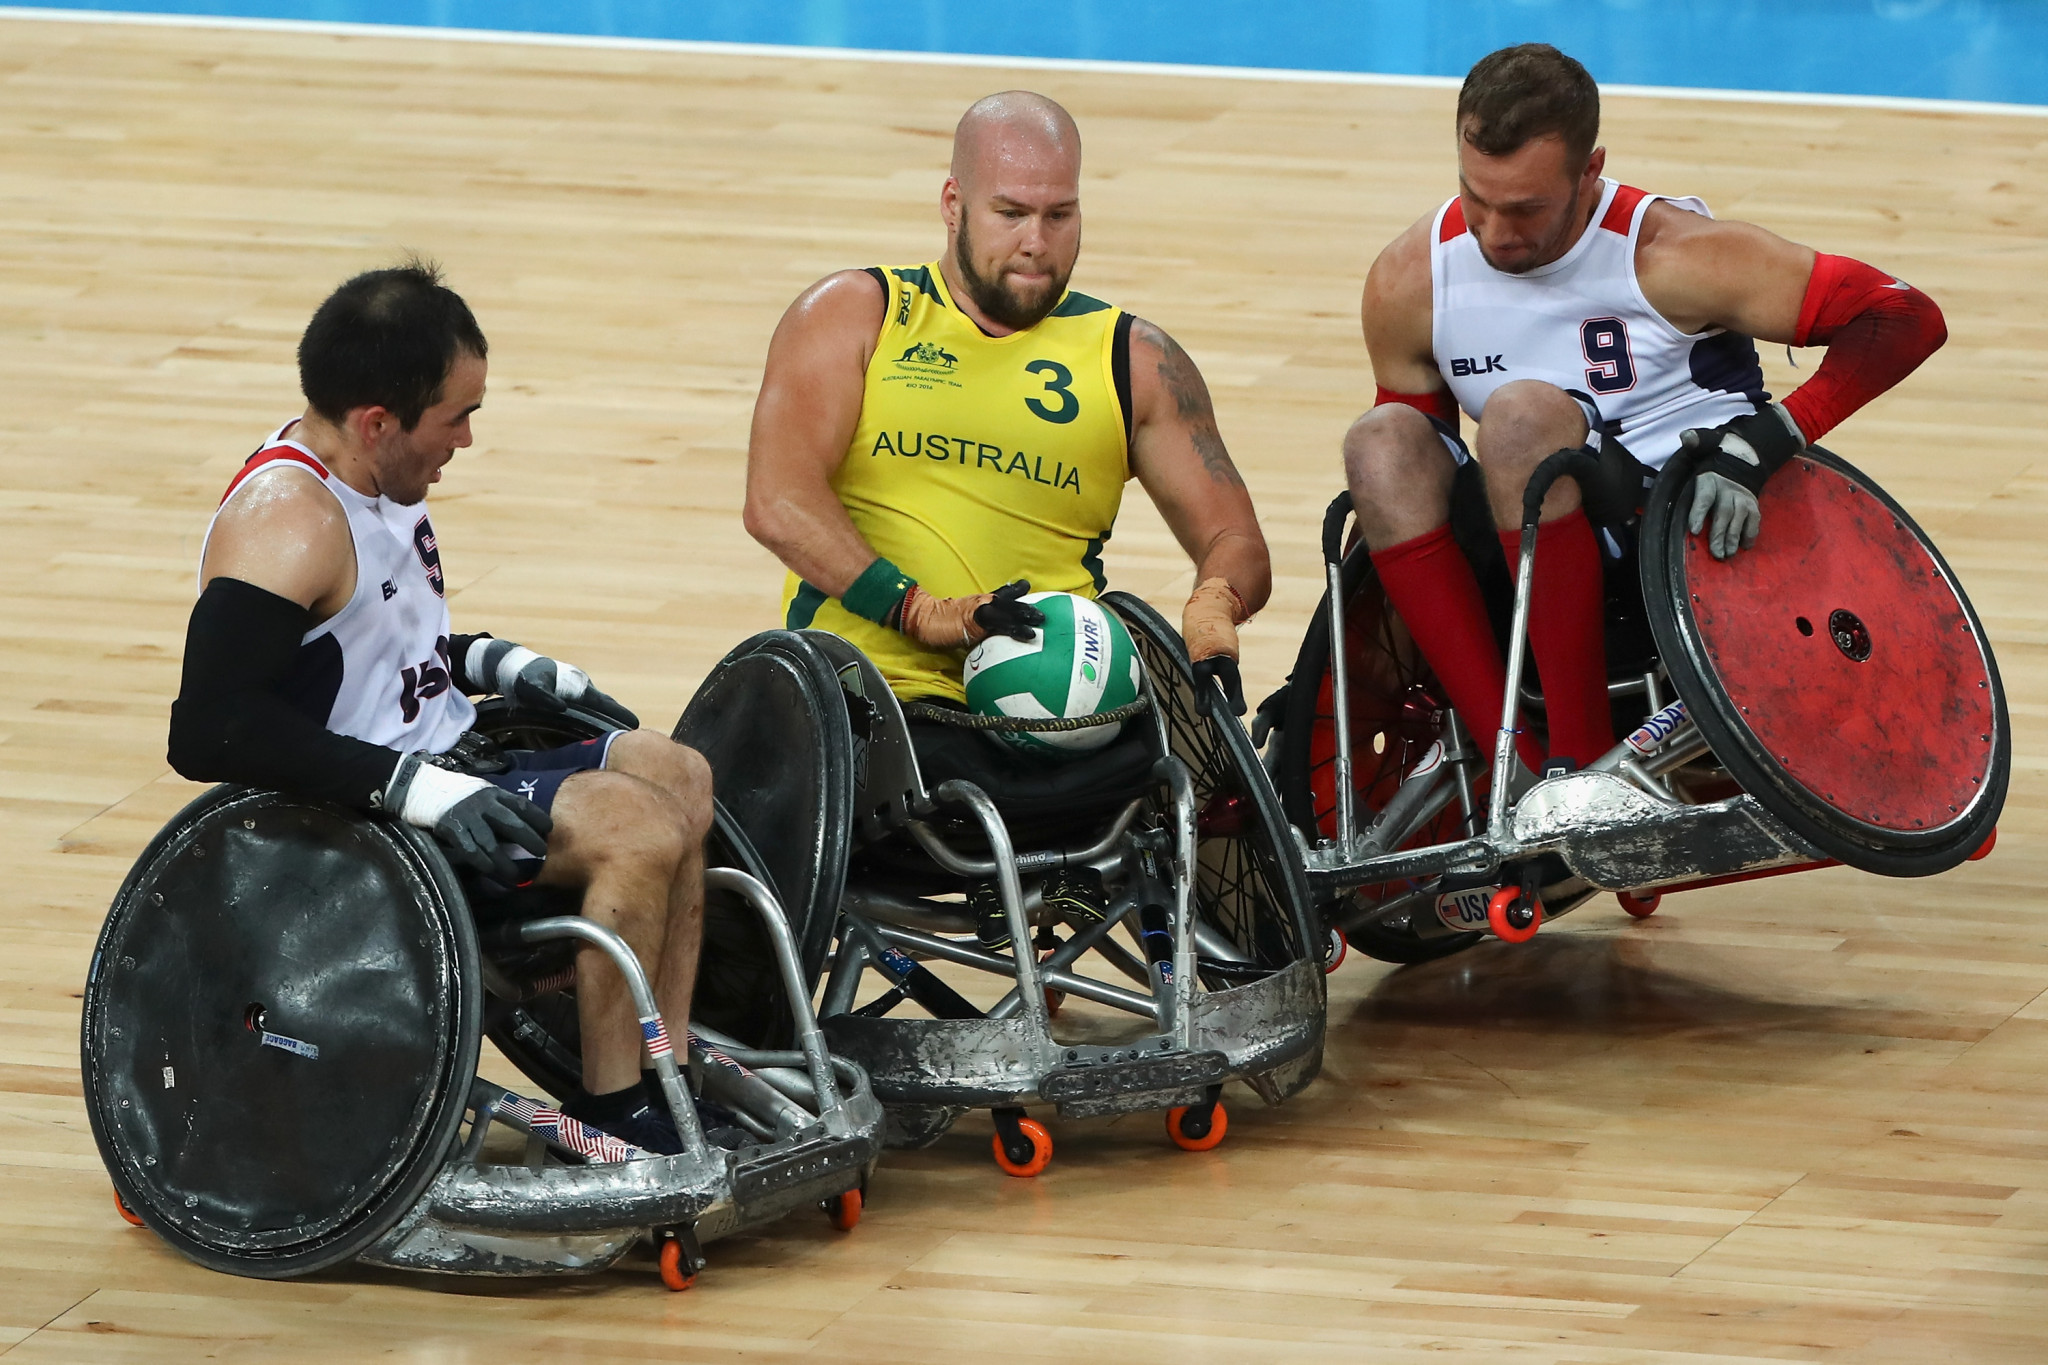 Ryley Batt helped Australia to wheelchair rugby glory at the London 2012 and Rio 2016 ©Getty Images